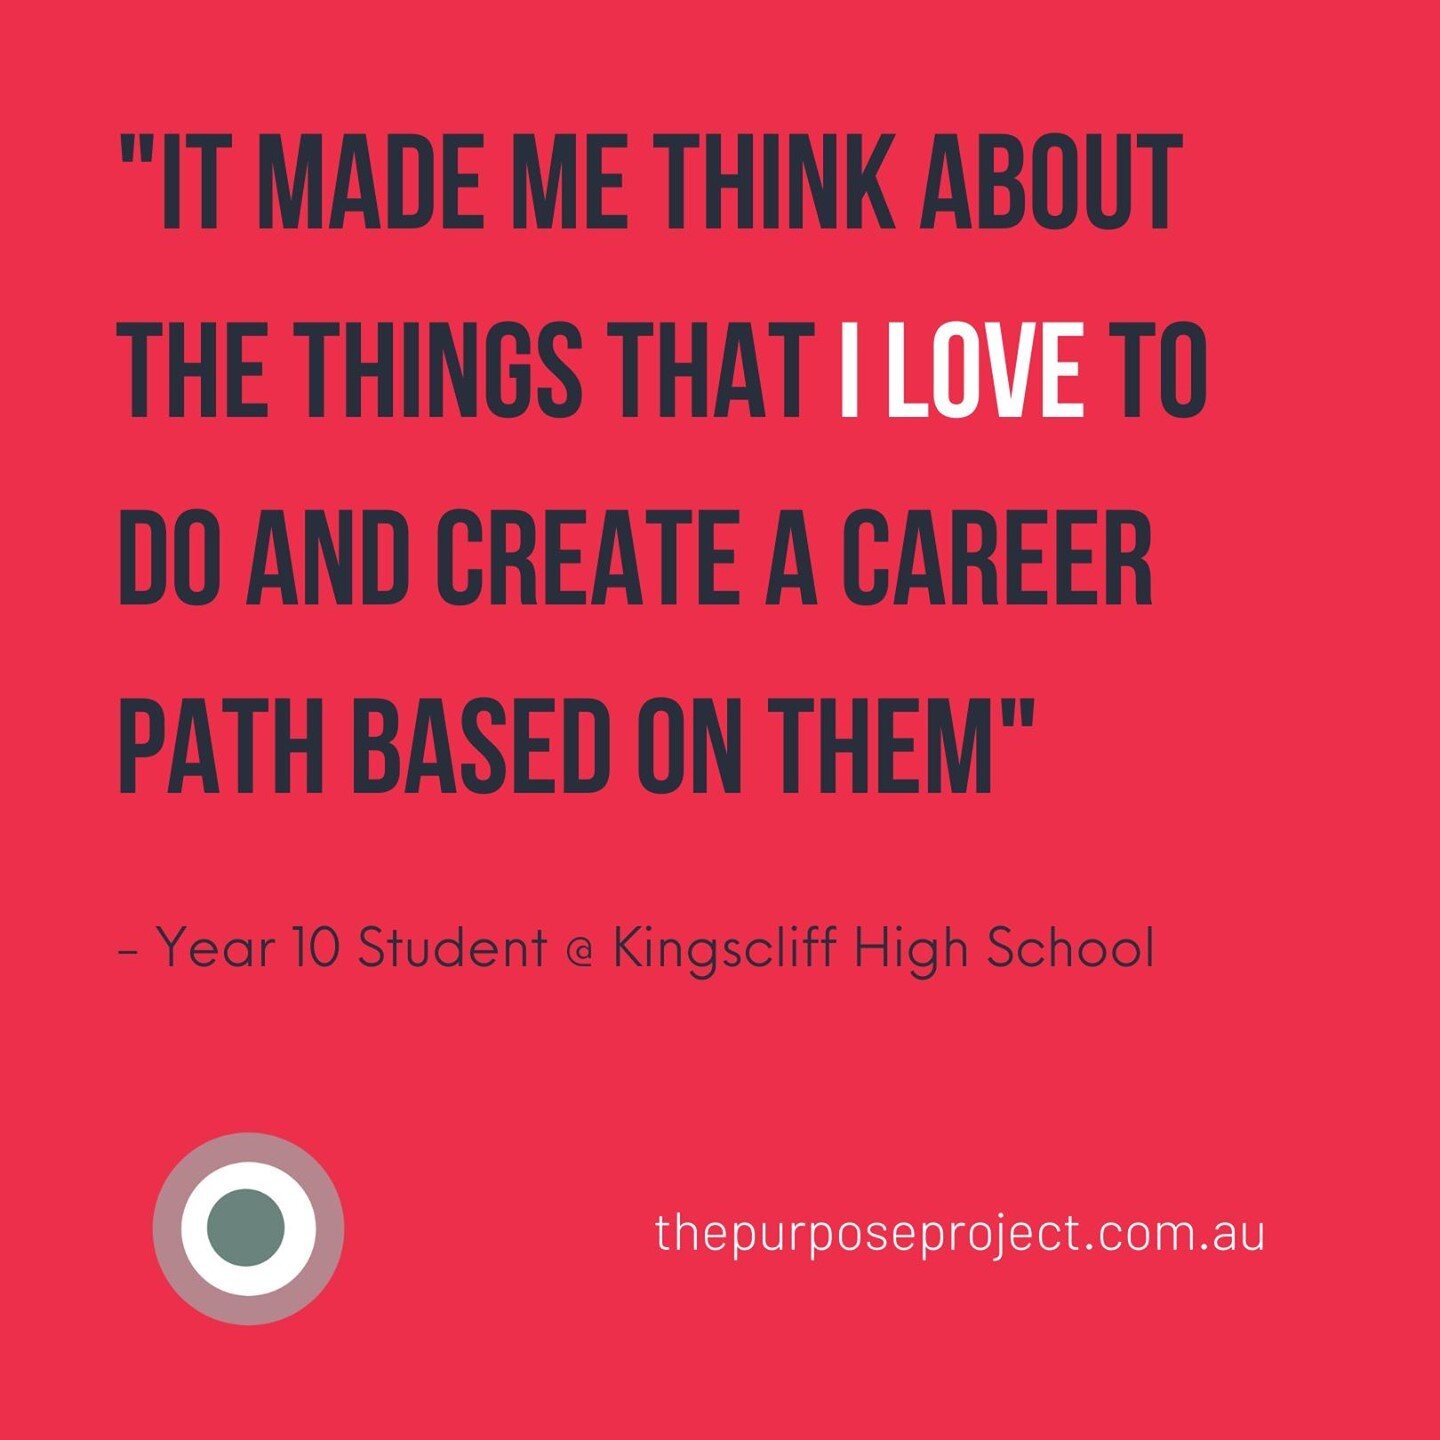 Our Life Design course at Kingscliff High School.⁠
⁠
It's easy to think of the things you like, but can a lot of youths struggle to look at these things in the right light to see if they correlate this to a career path. ⁠
⁠
If all youths were able to